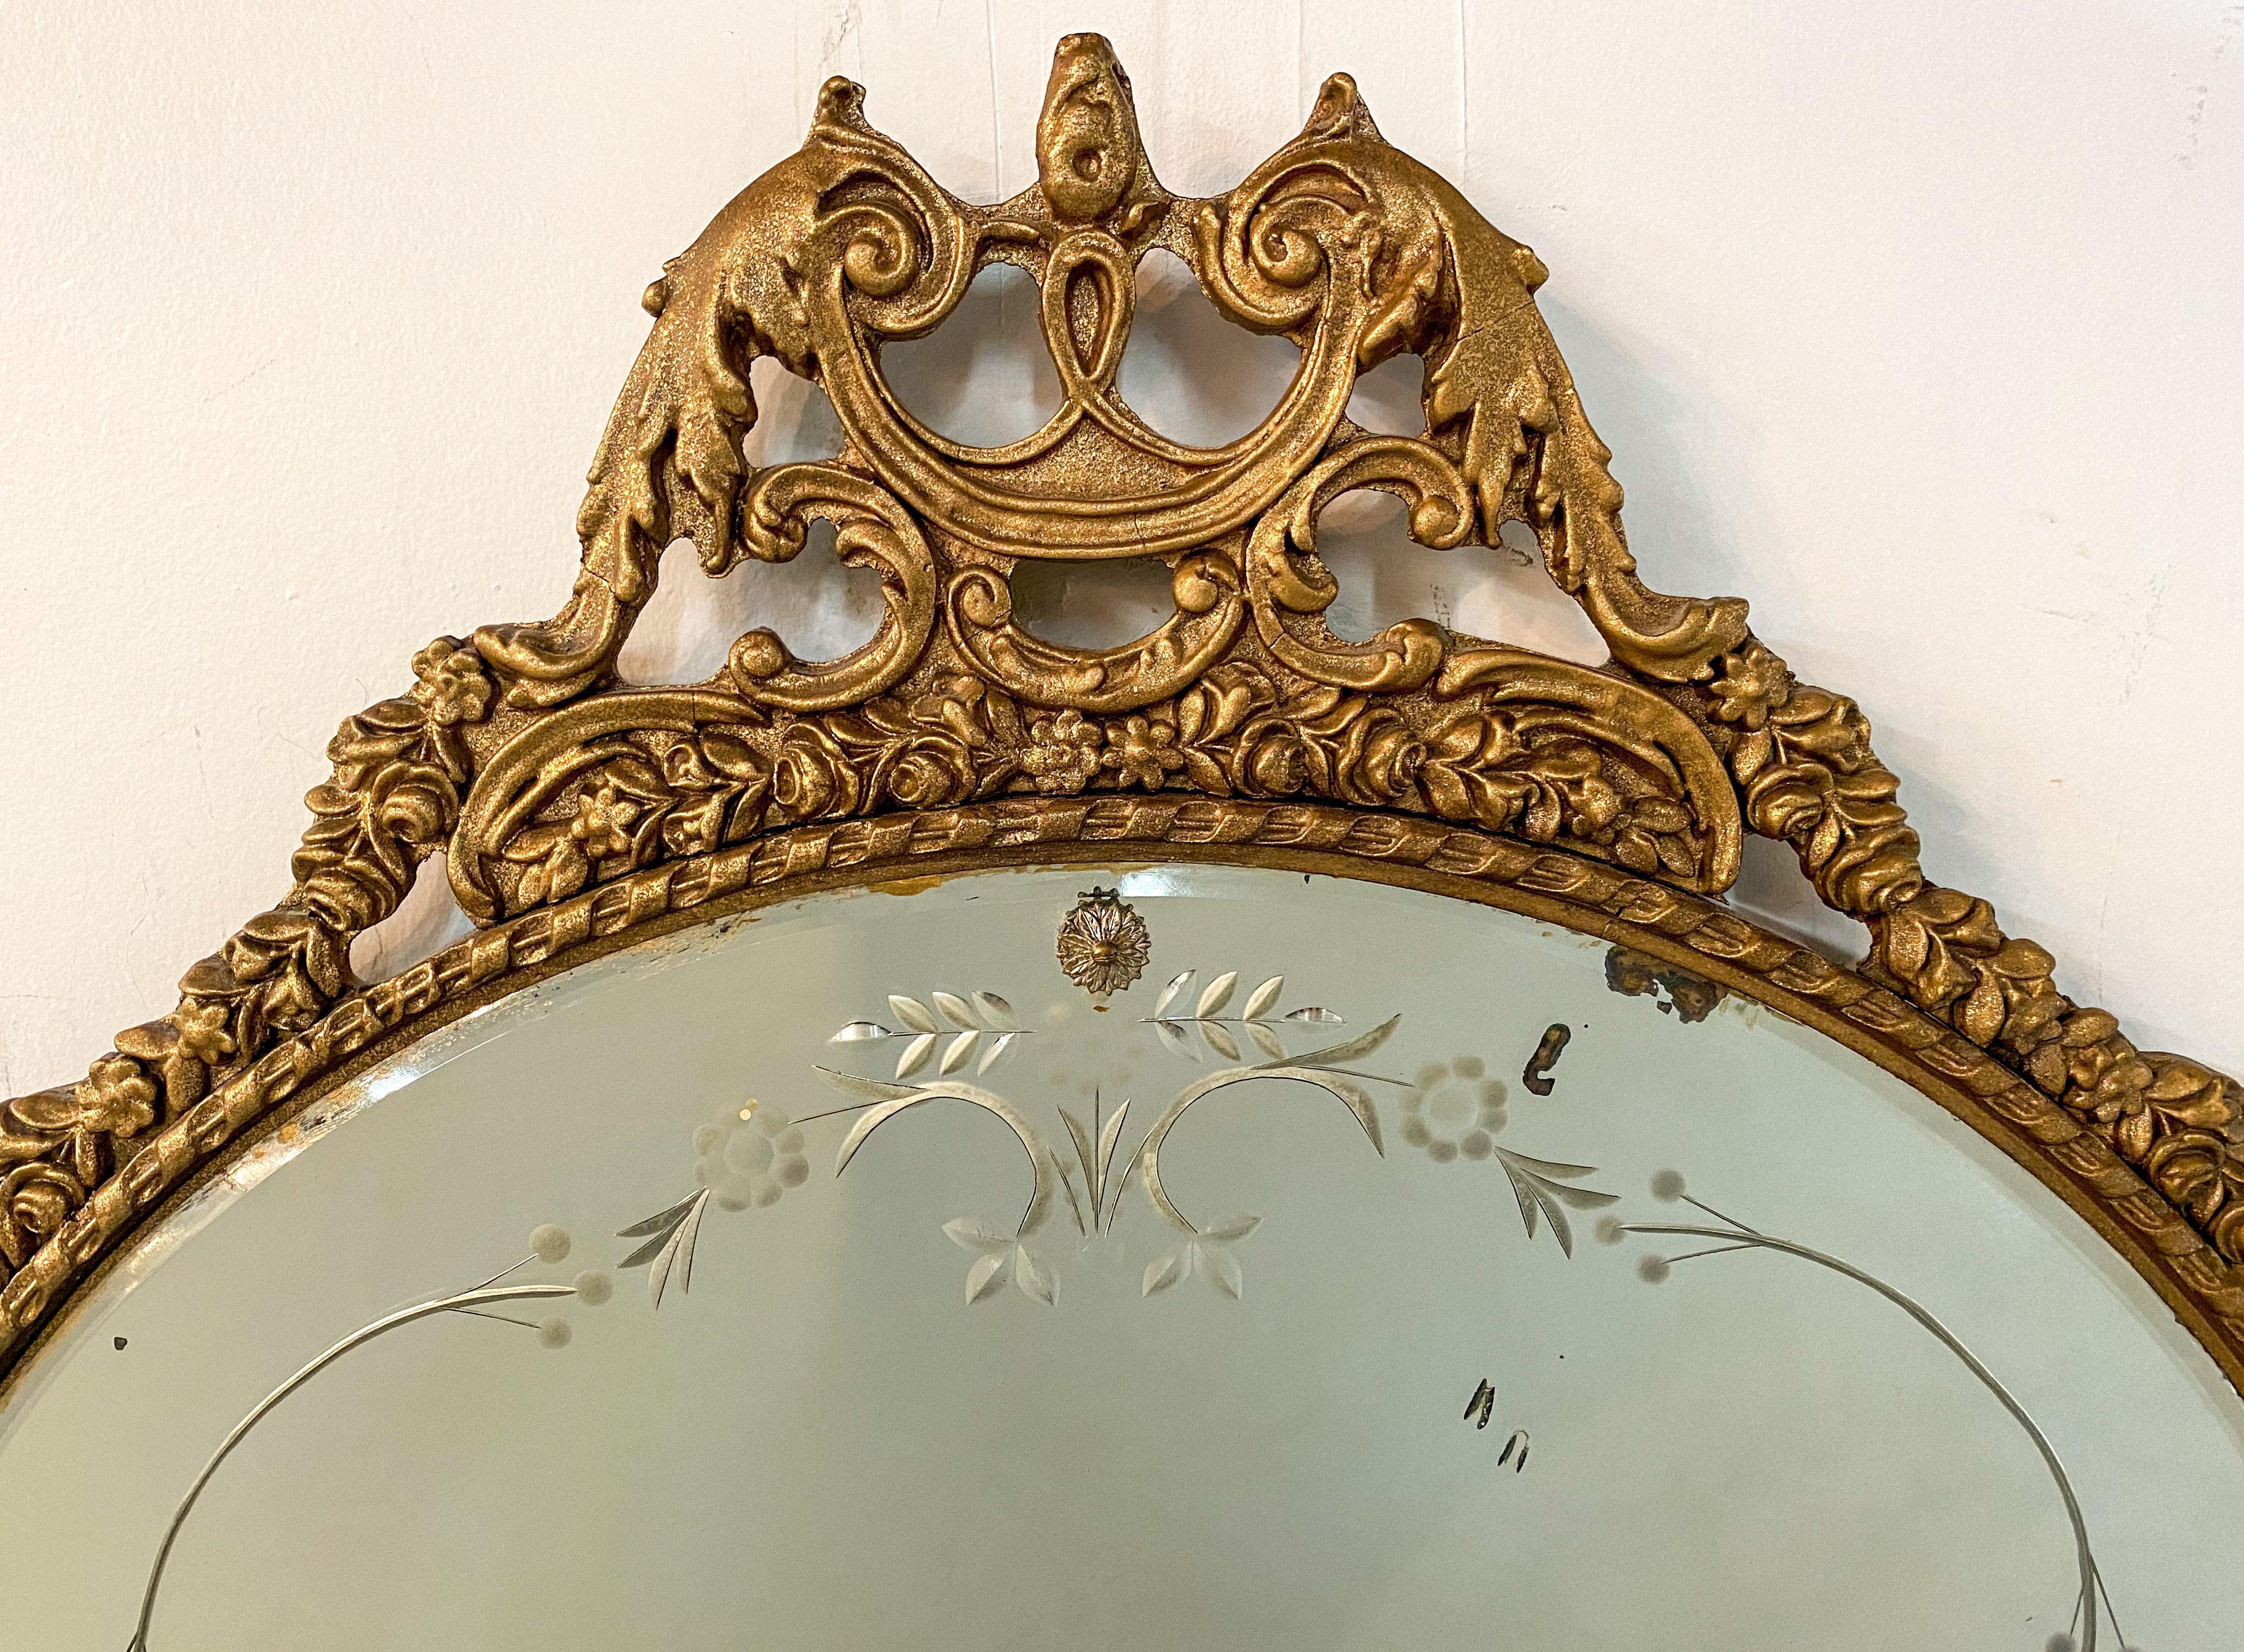 A 19th Century French belle époque era neoclassical style round mirror. The stunning mirror is beautifully gilded and shows fine and elegant hand carving details of floral and scrolls designs. The glass mirror is embellished with floral etching and